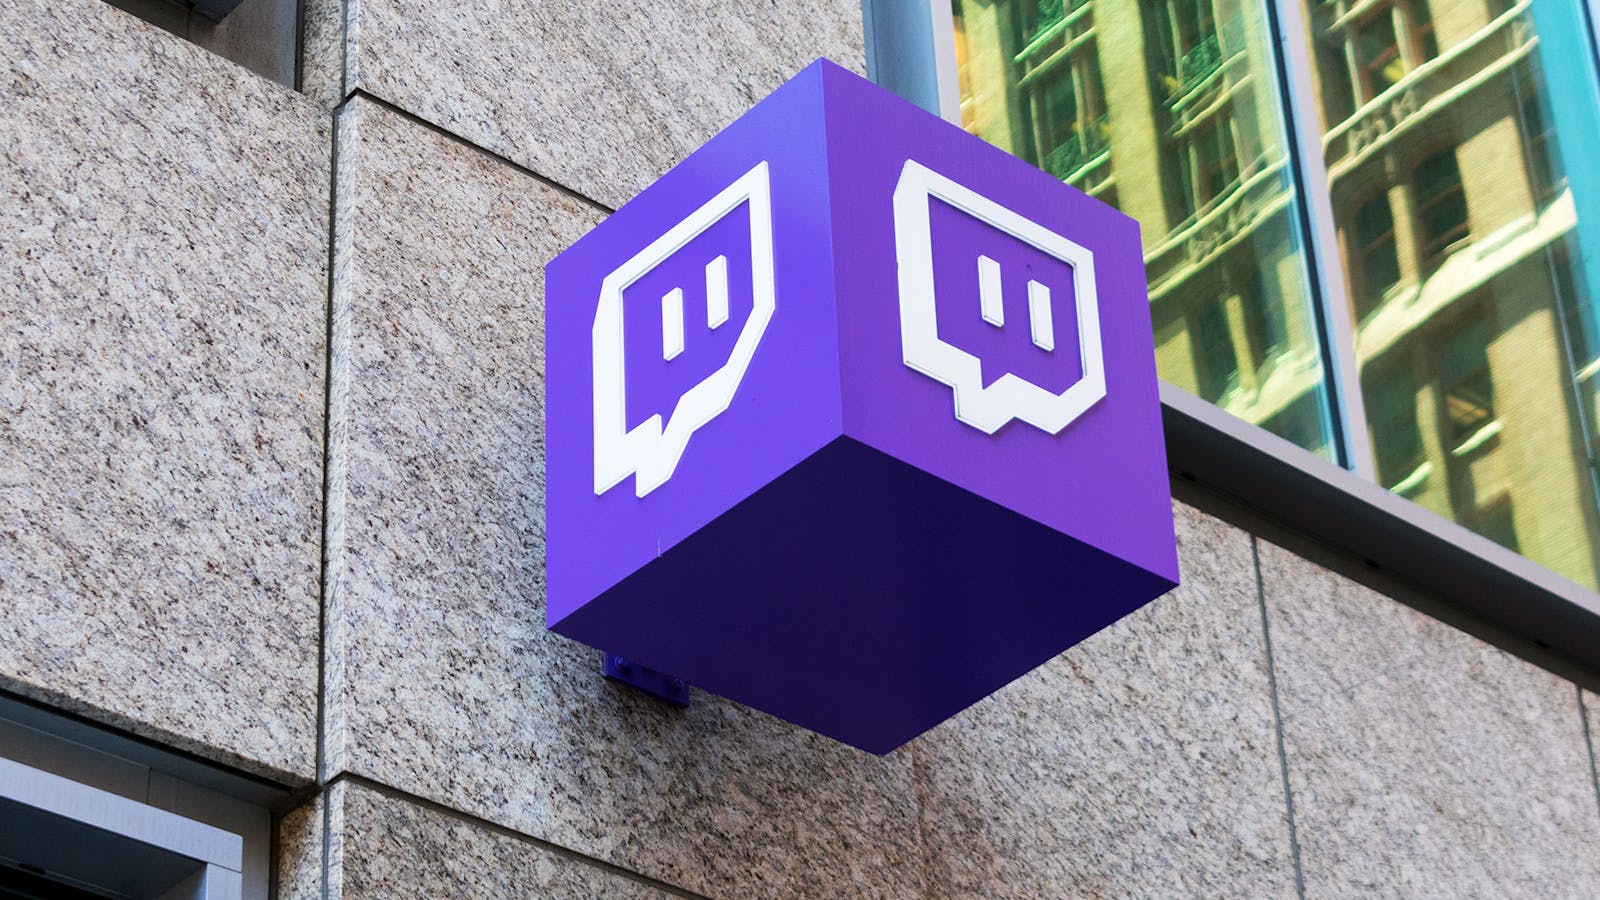 Twitch headquarters in San Francisco. Photo by Shutterstock